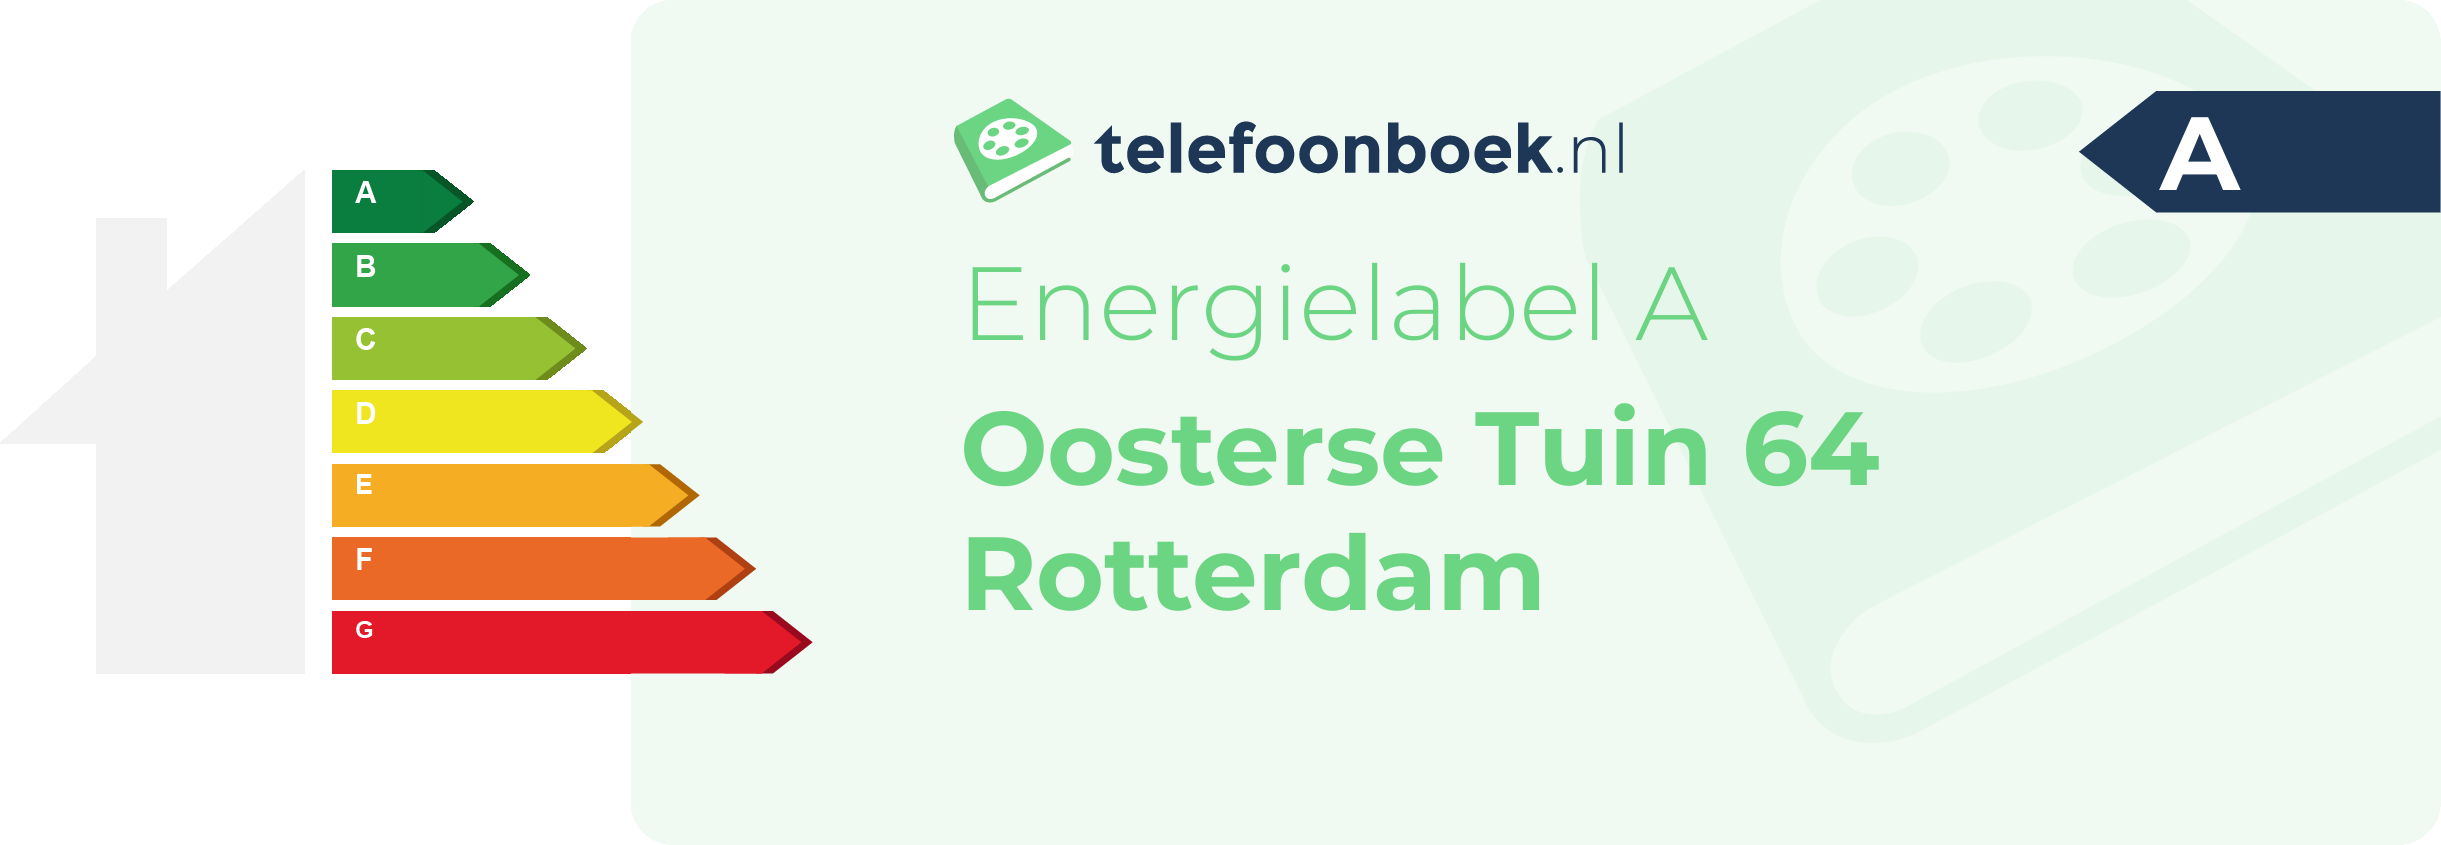 Energielabel Oosterse Tuin 64 Rotterdam